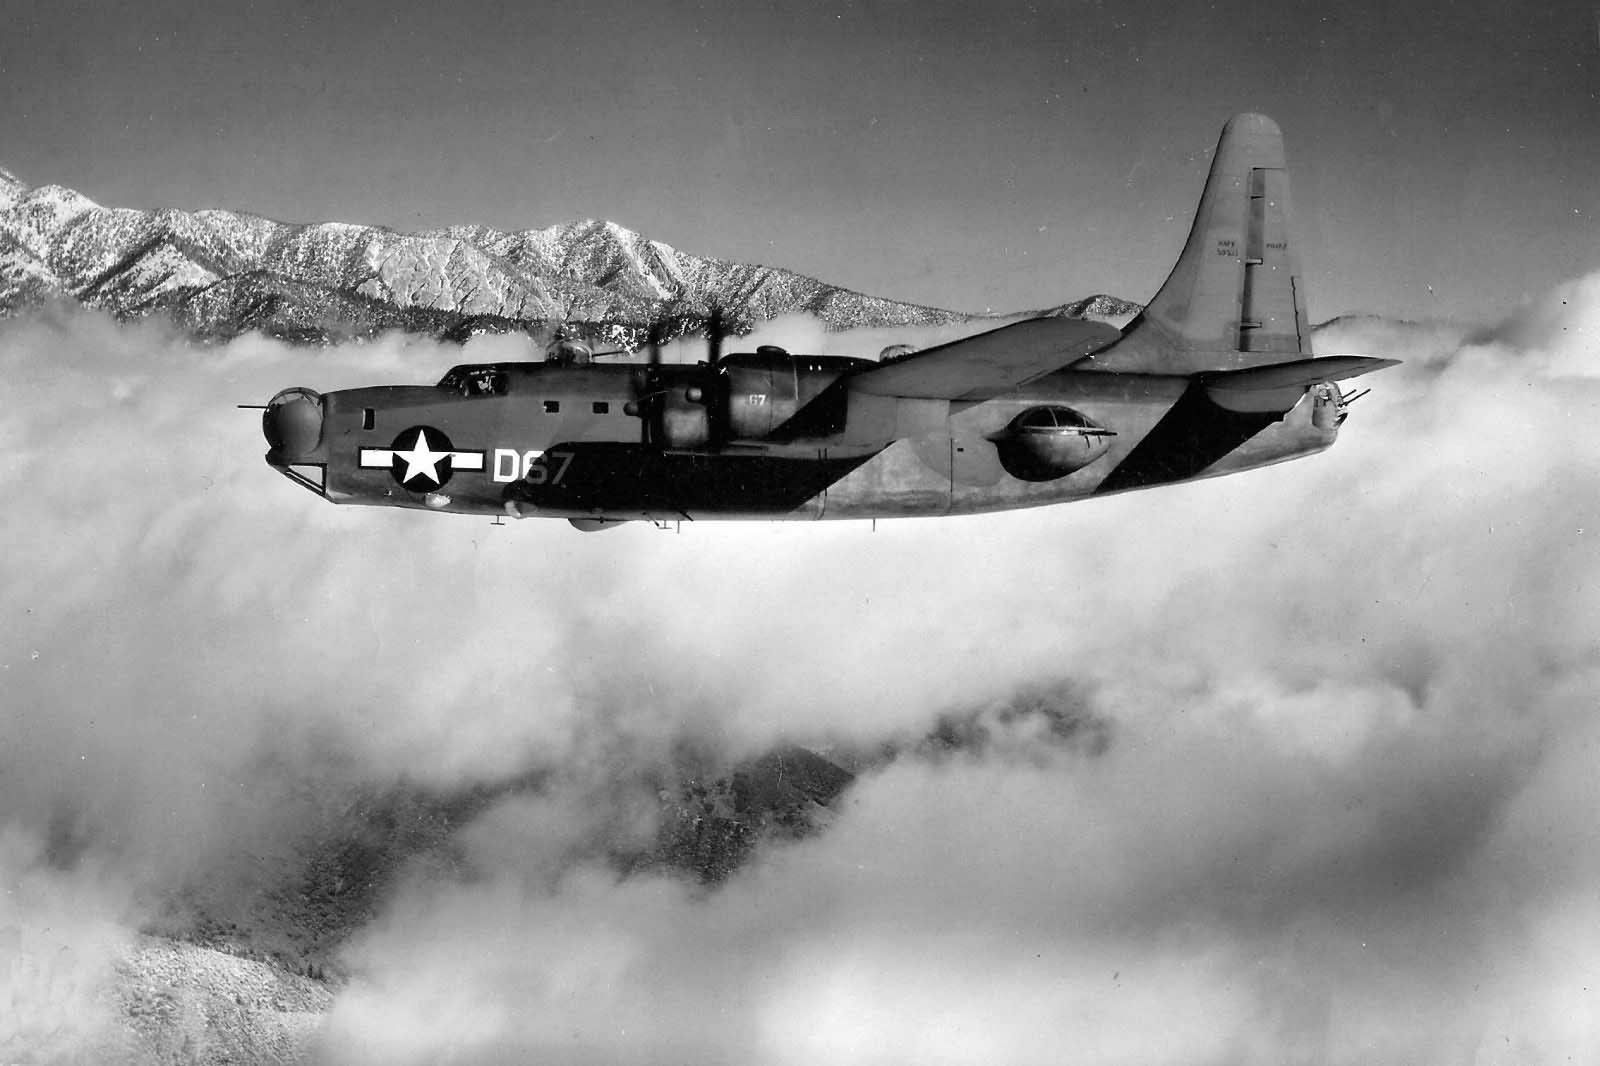 Consolidated PB4Y-2 Privateer D67 in flight, 1945 (3)